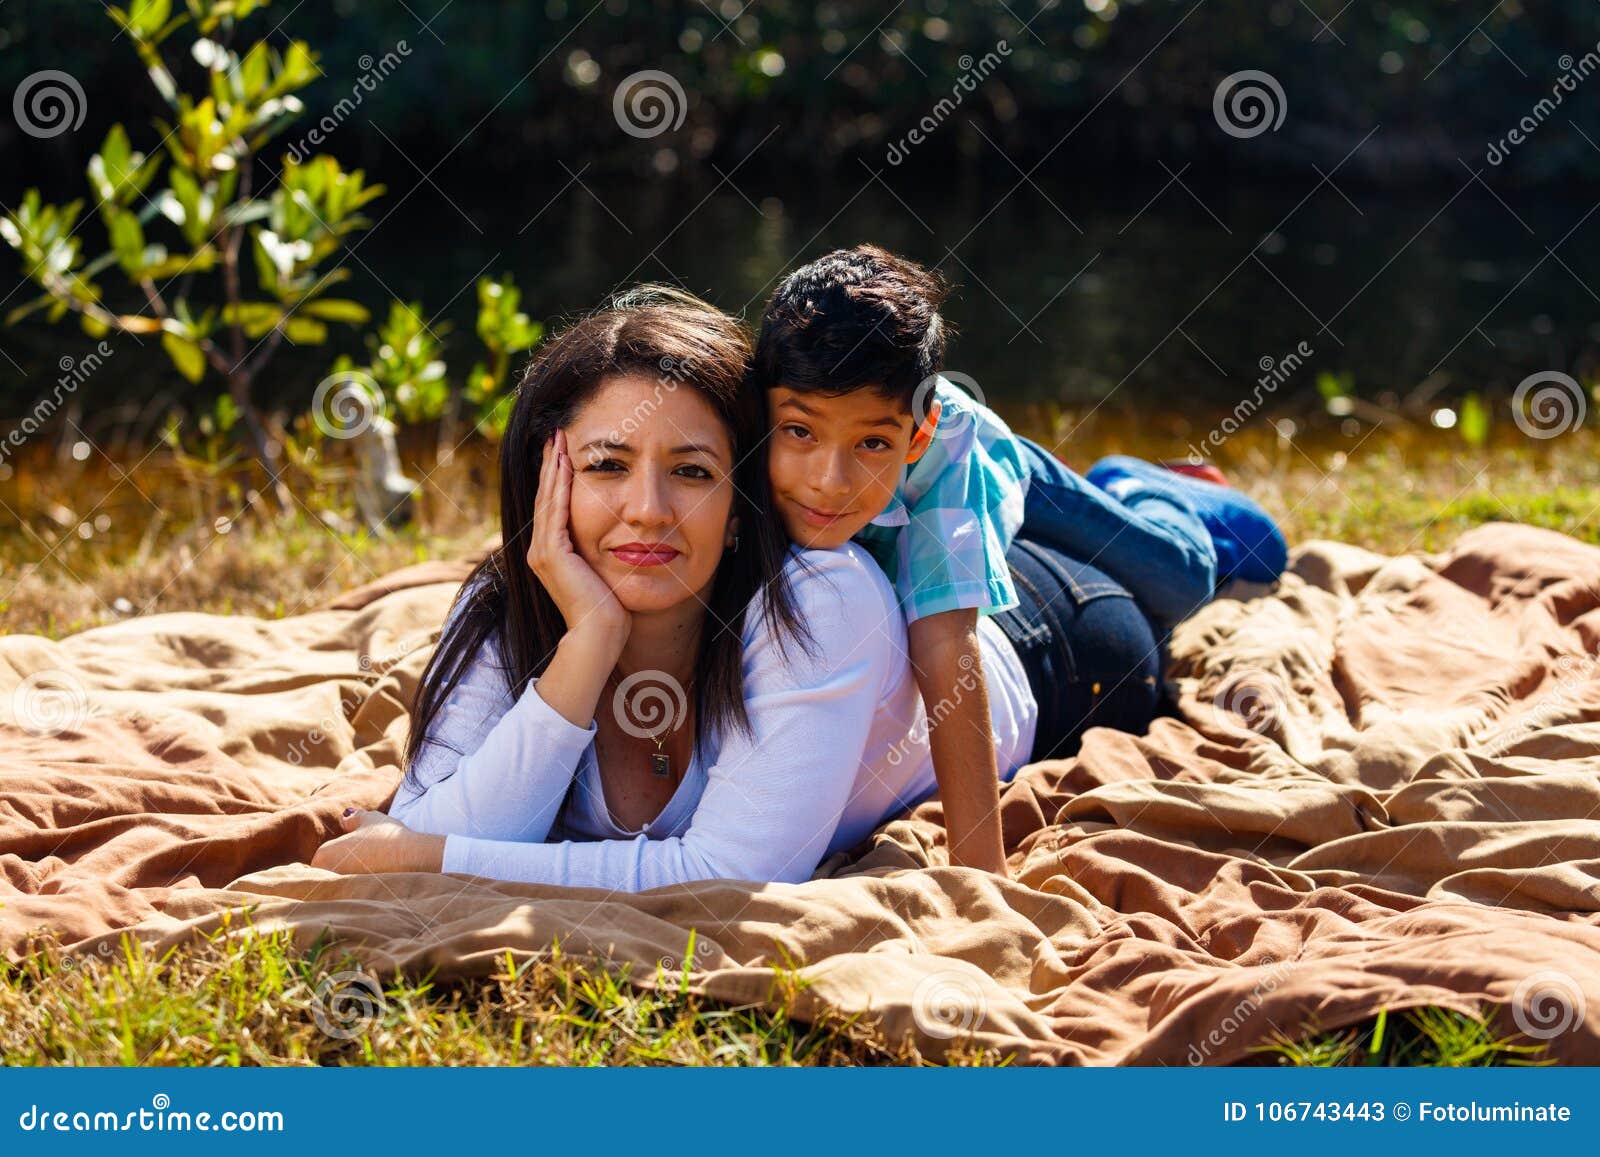 Mother And Son Outdoor Portrait Stock Image Image Of Portrait Closeness